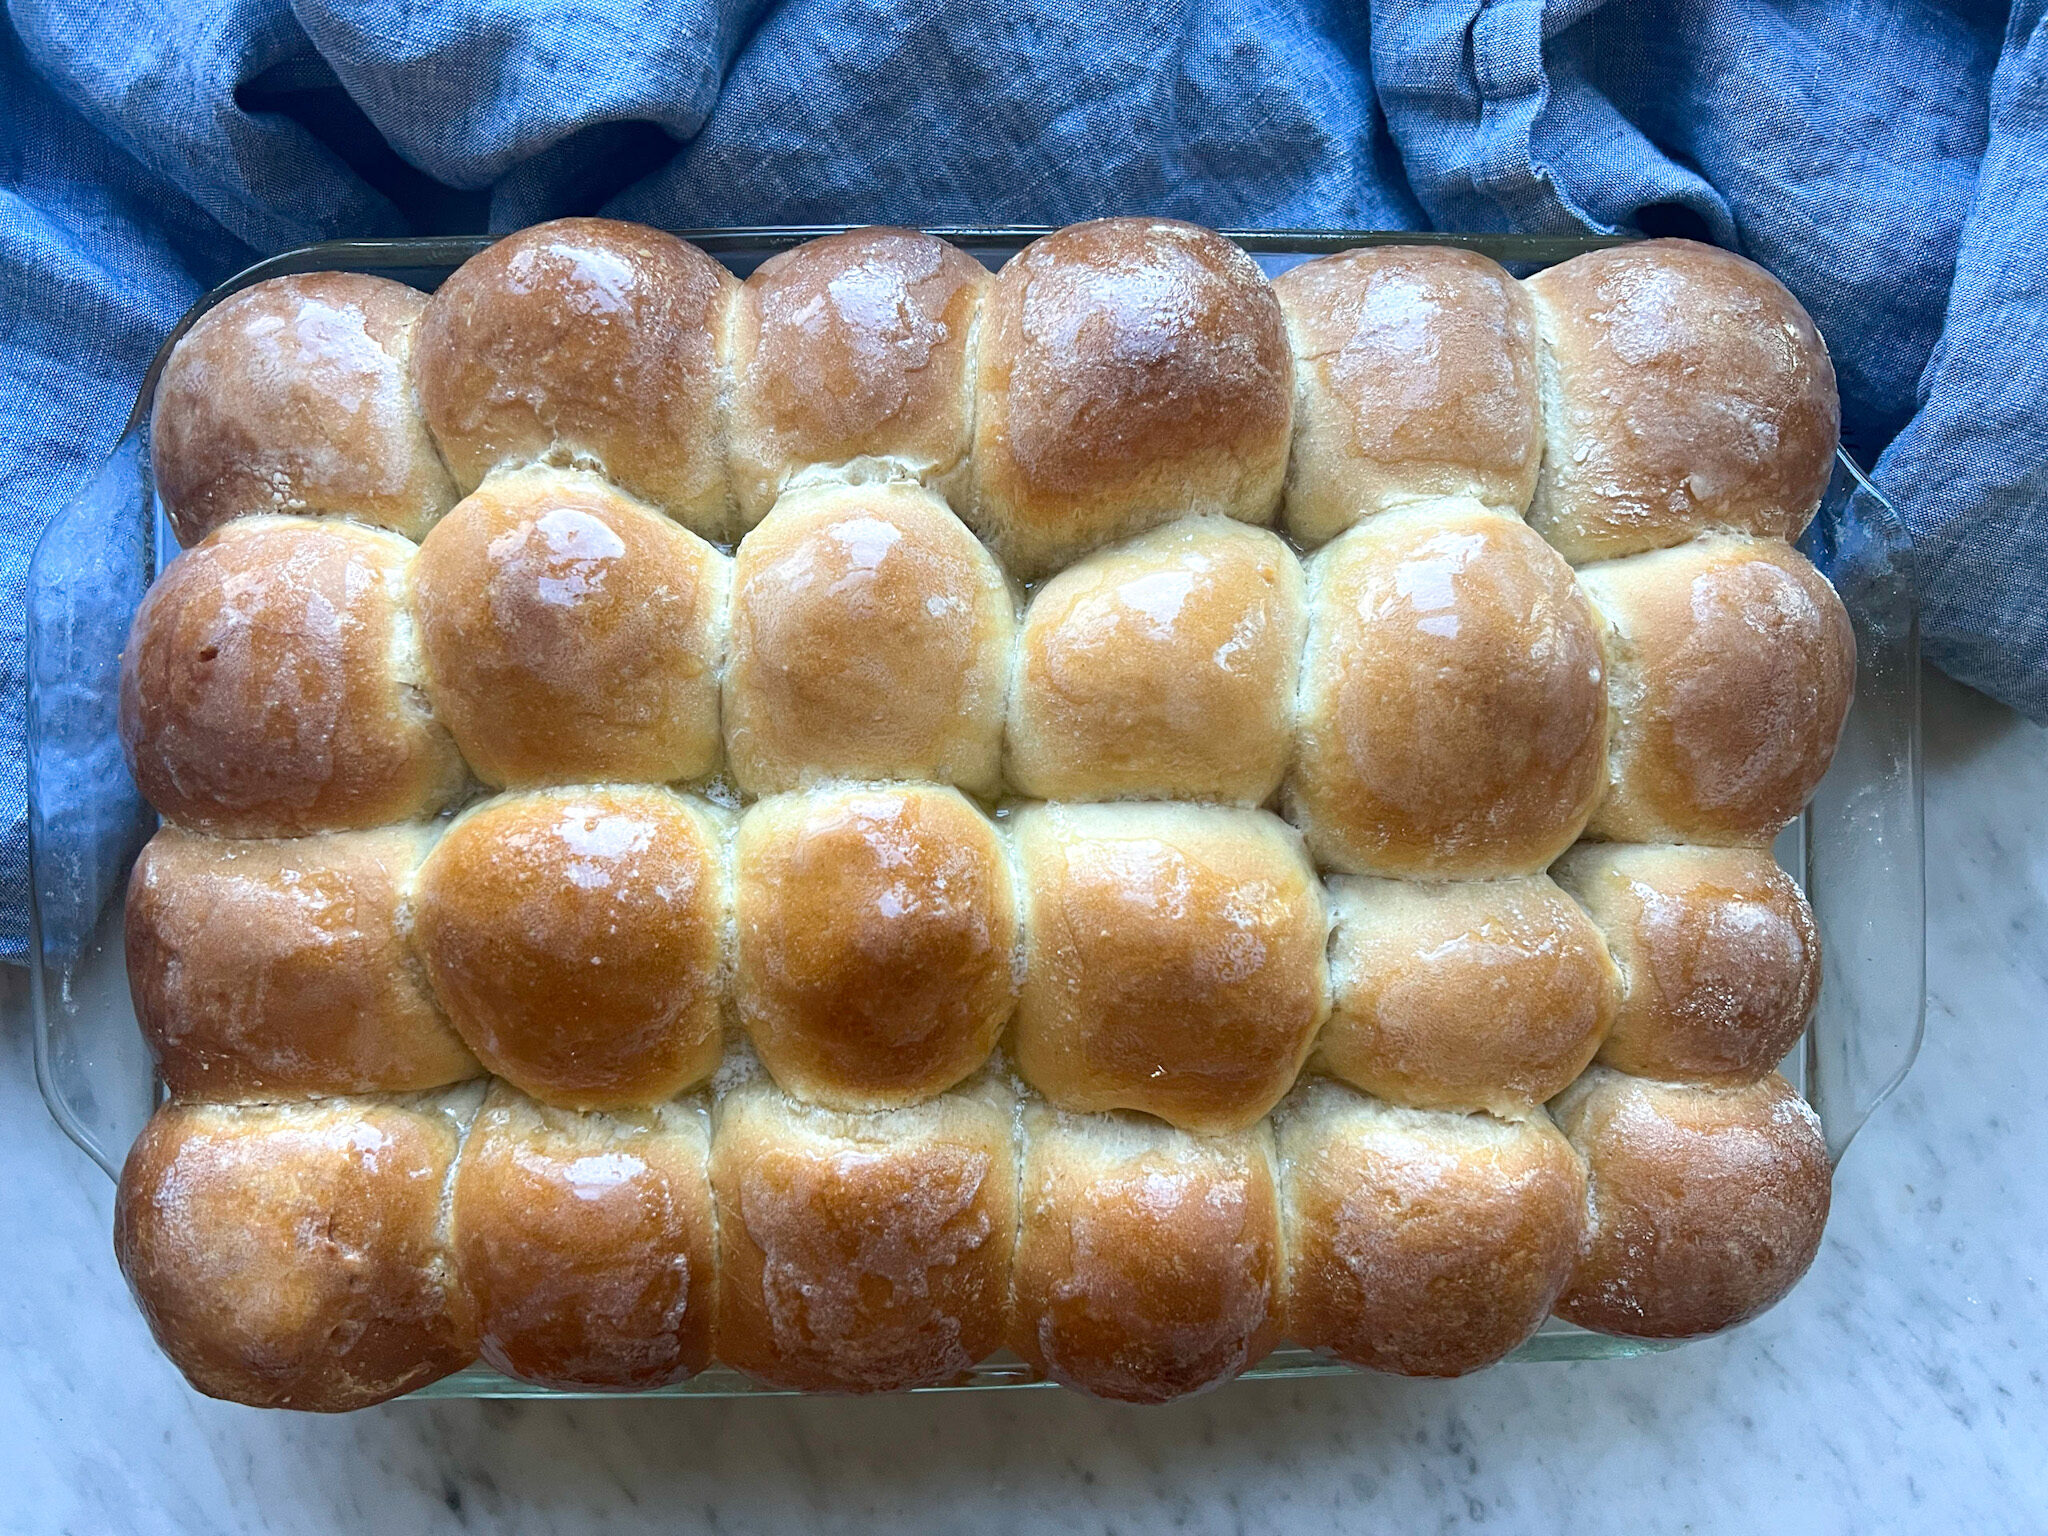 baked rolls with butter over the top and a blue towel